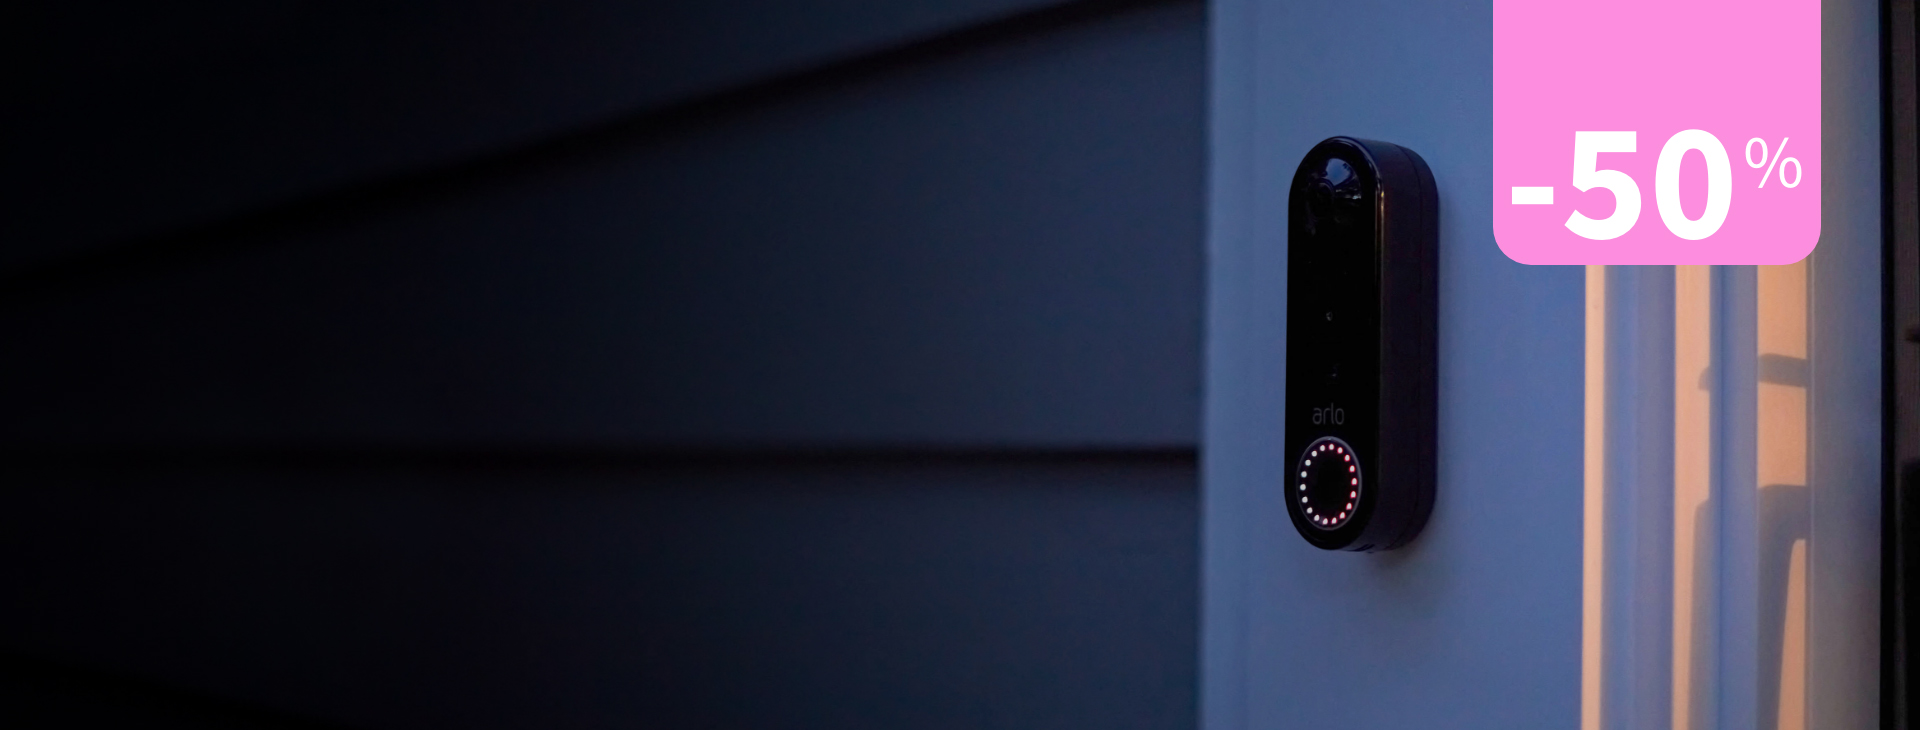 The Arlo Ultra wall-mounted surveillance camera that films in the dark with its built-in spotlight.